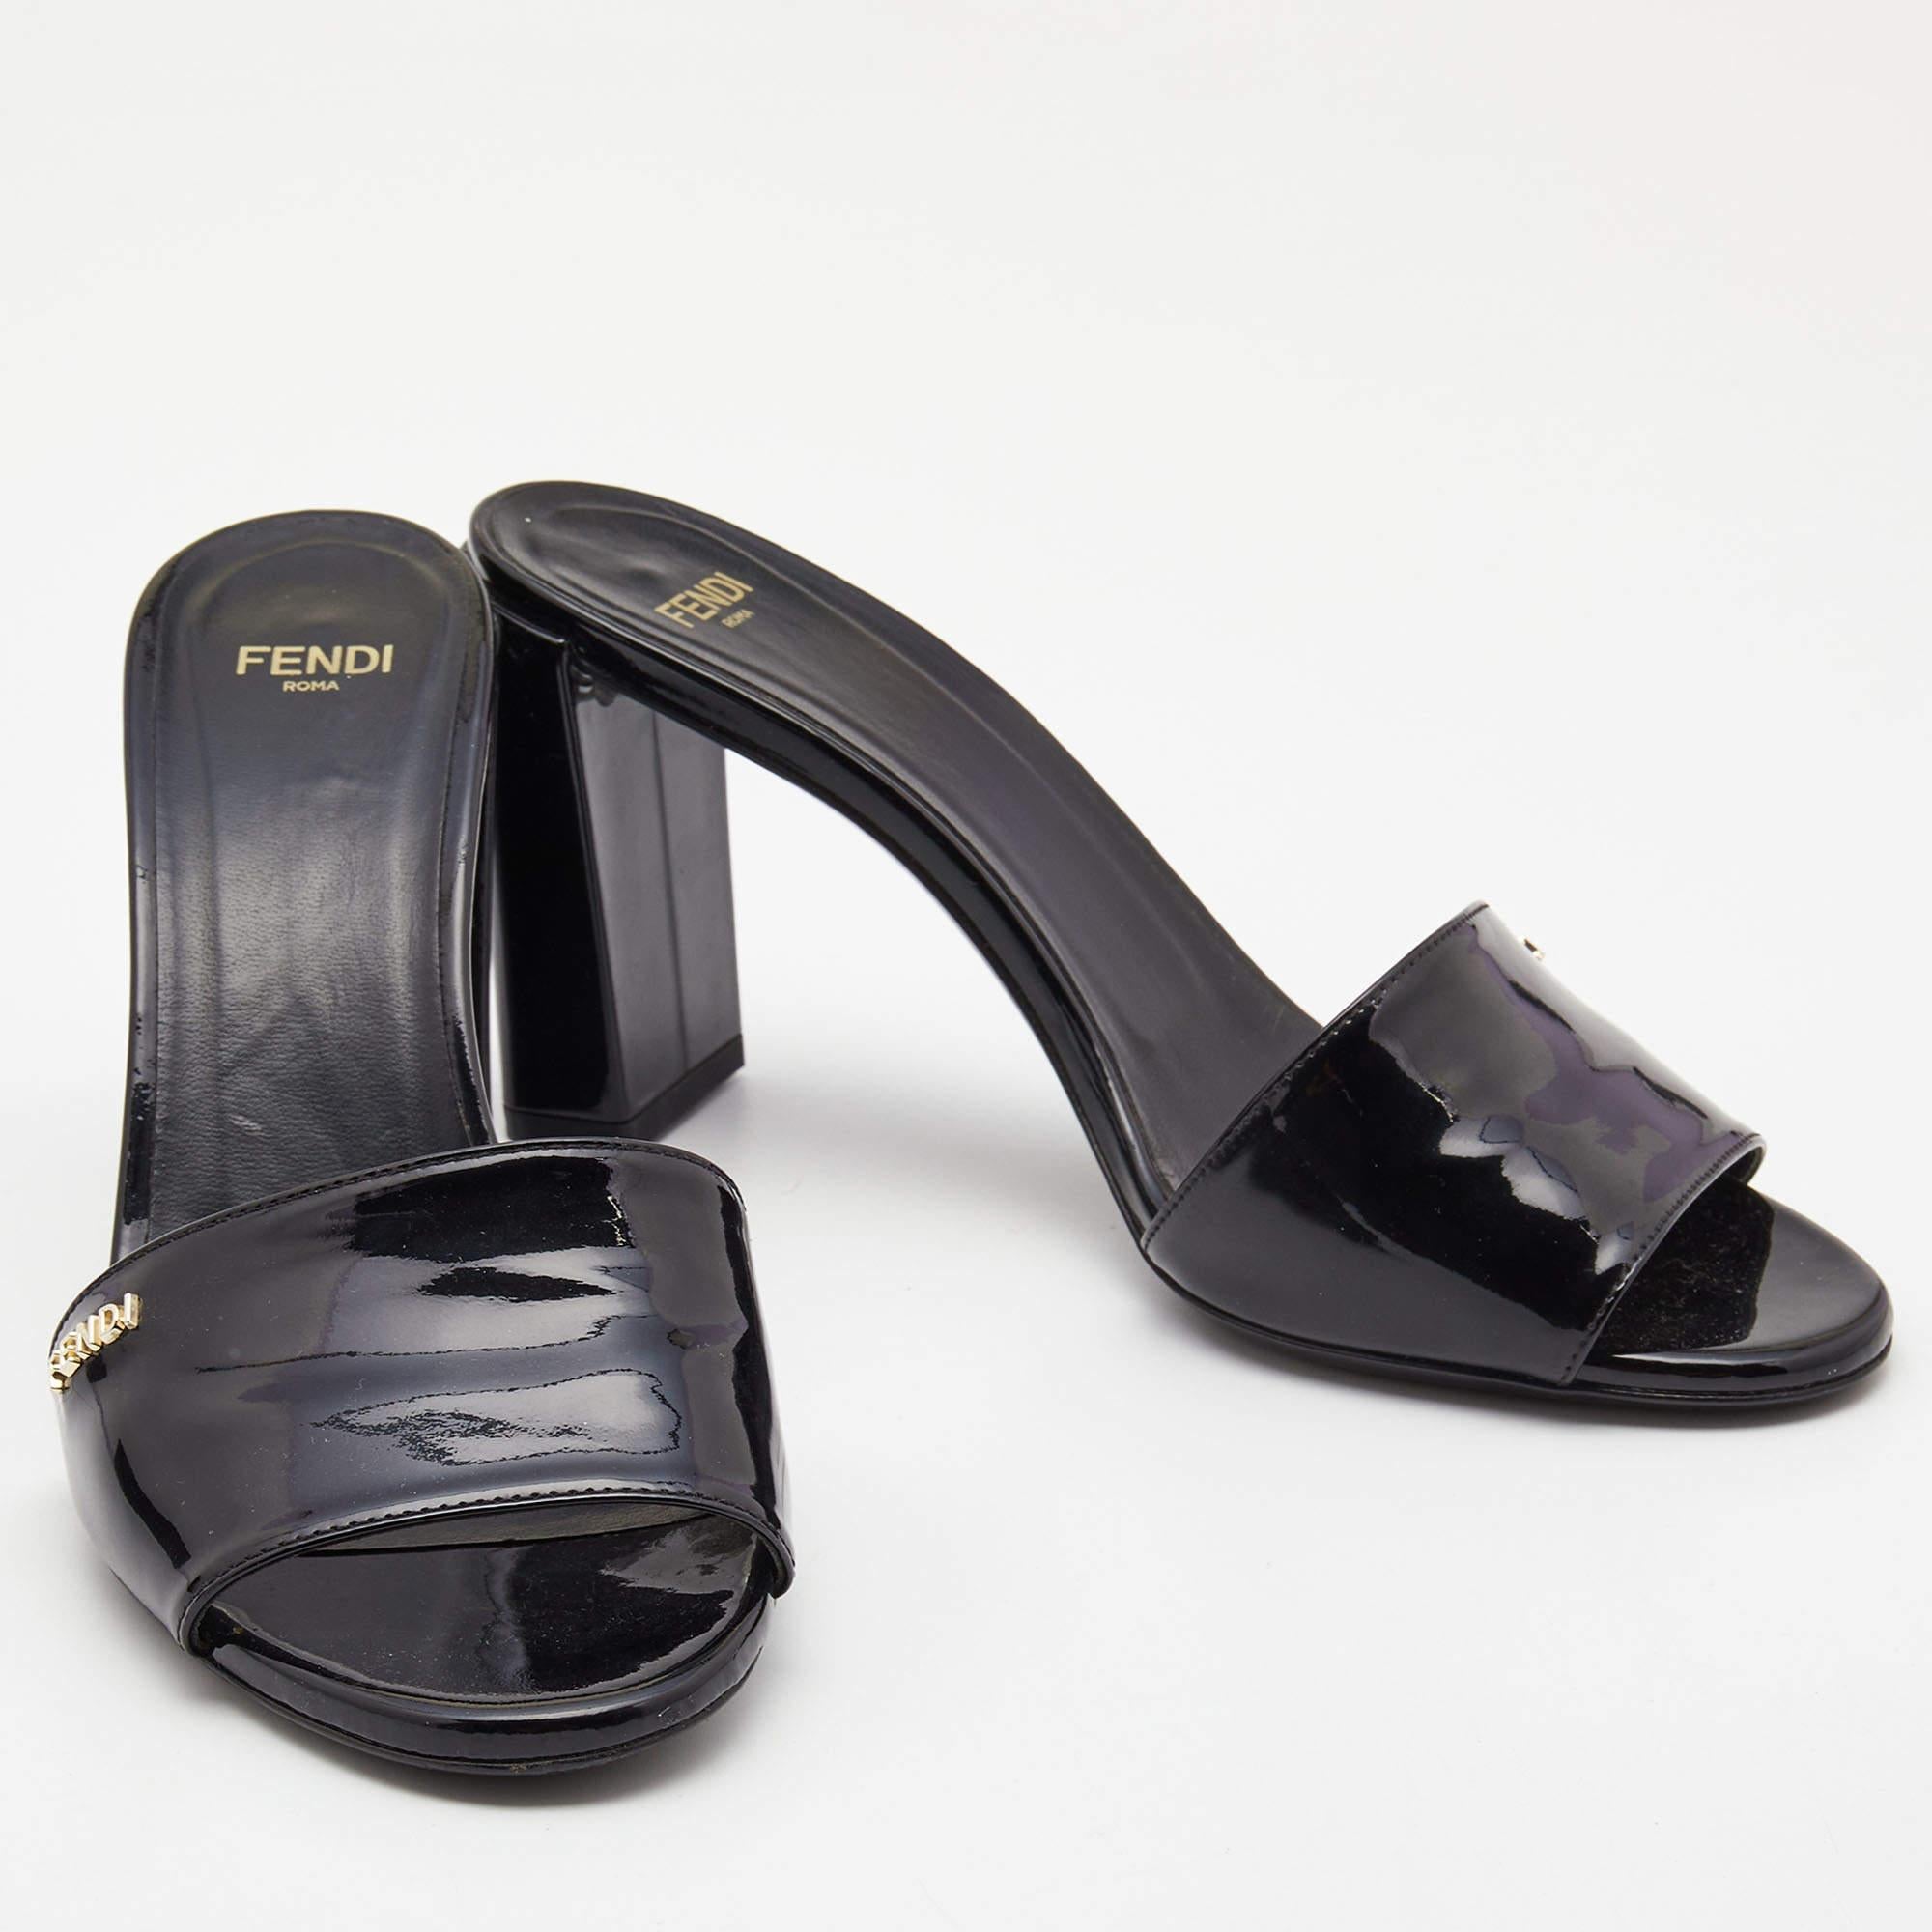 These sandals will frame your feet in an elegant manner. Crafted from quality materials, they flaunt a classy display, comfortable insoles & durable heels.

